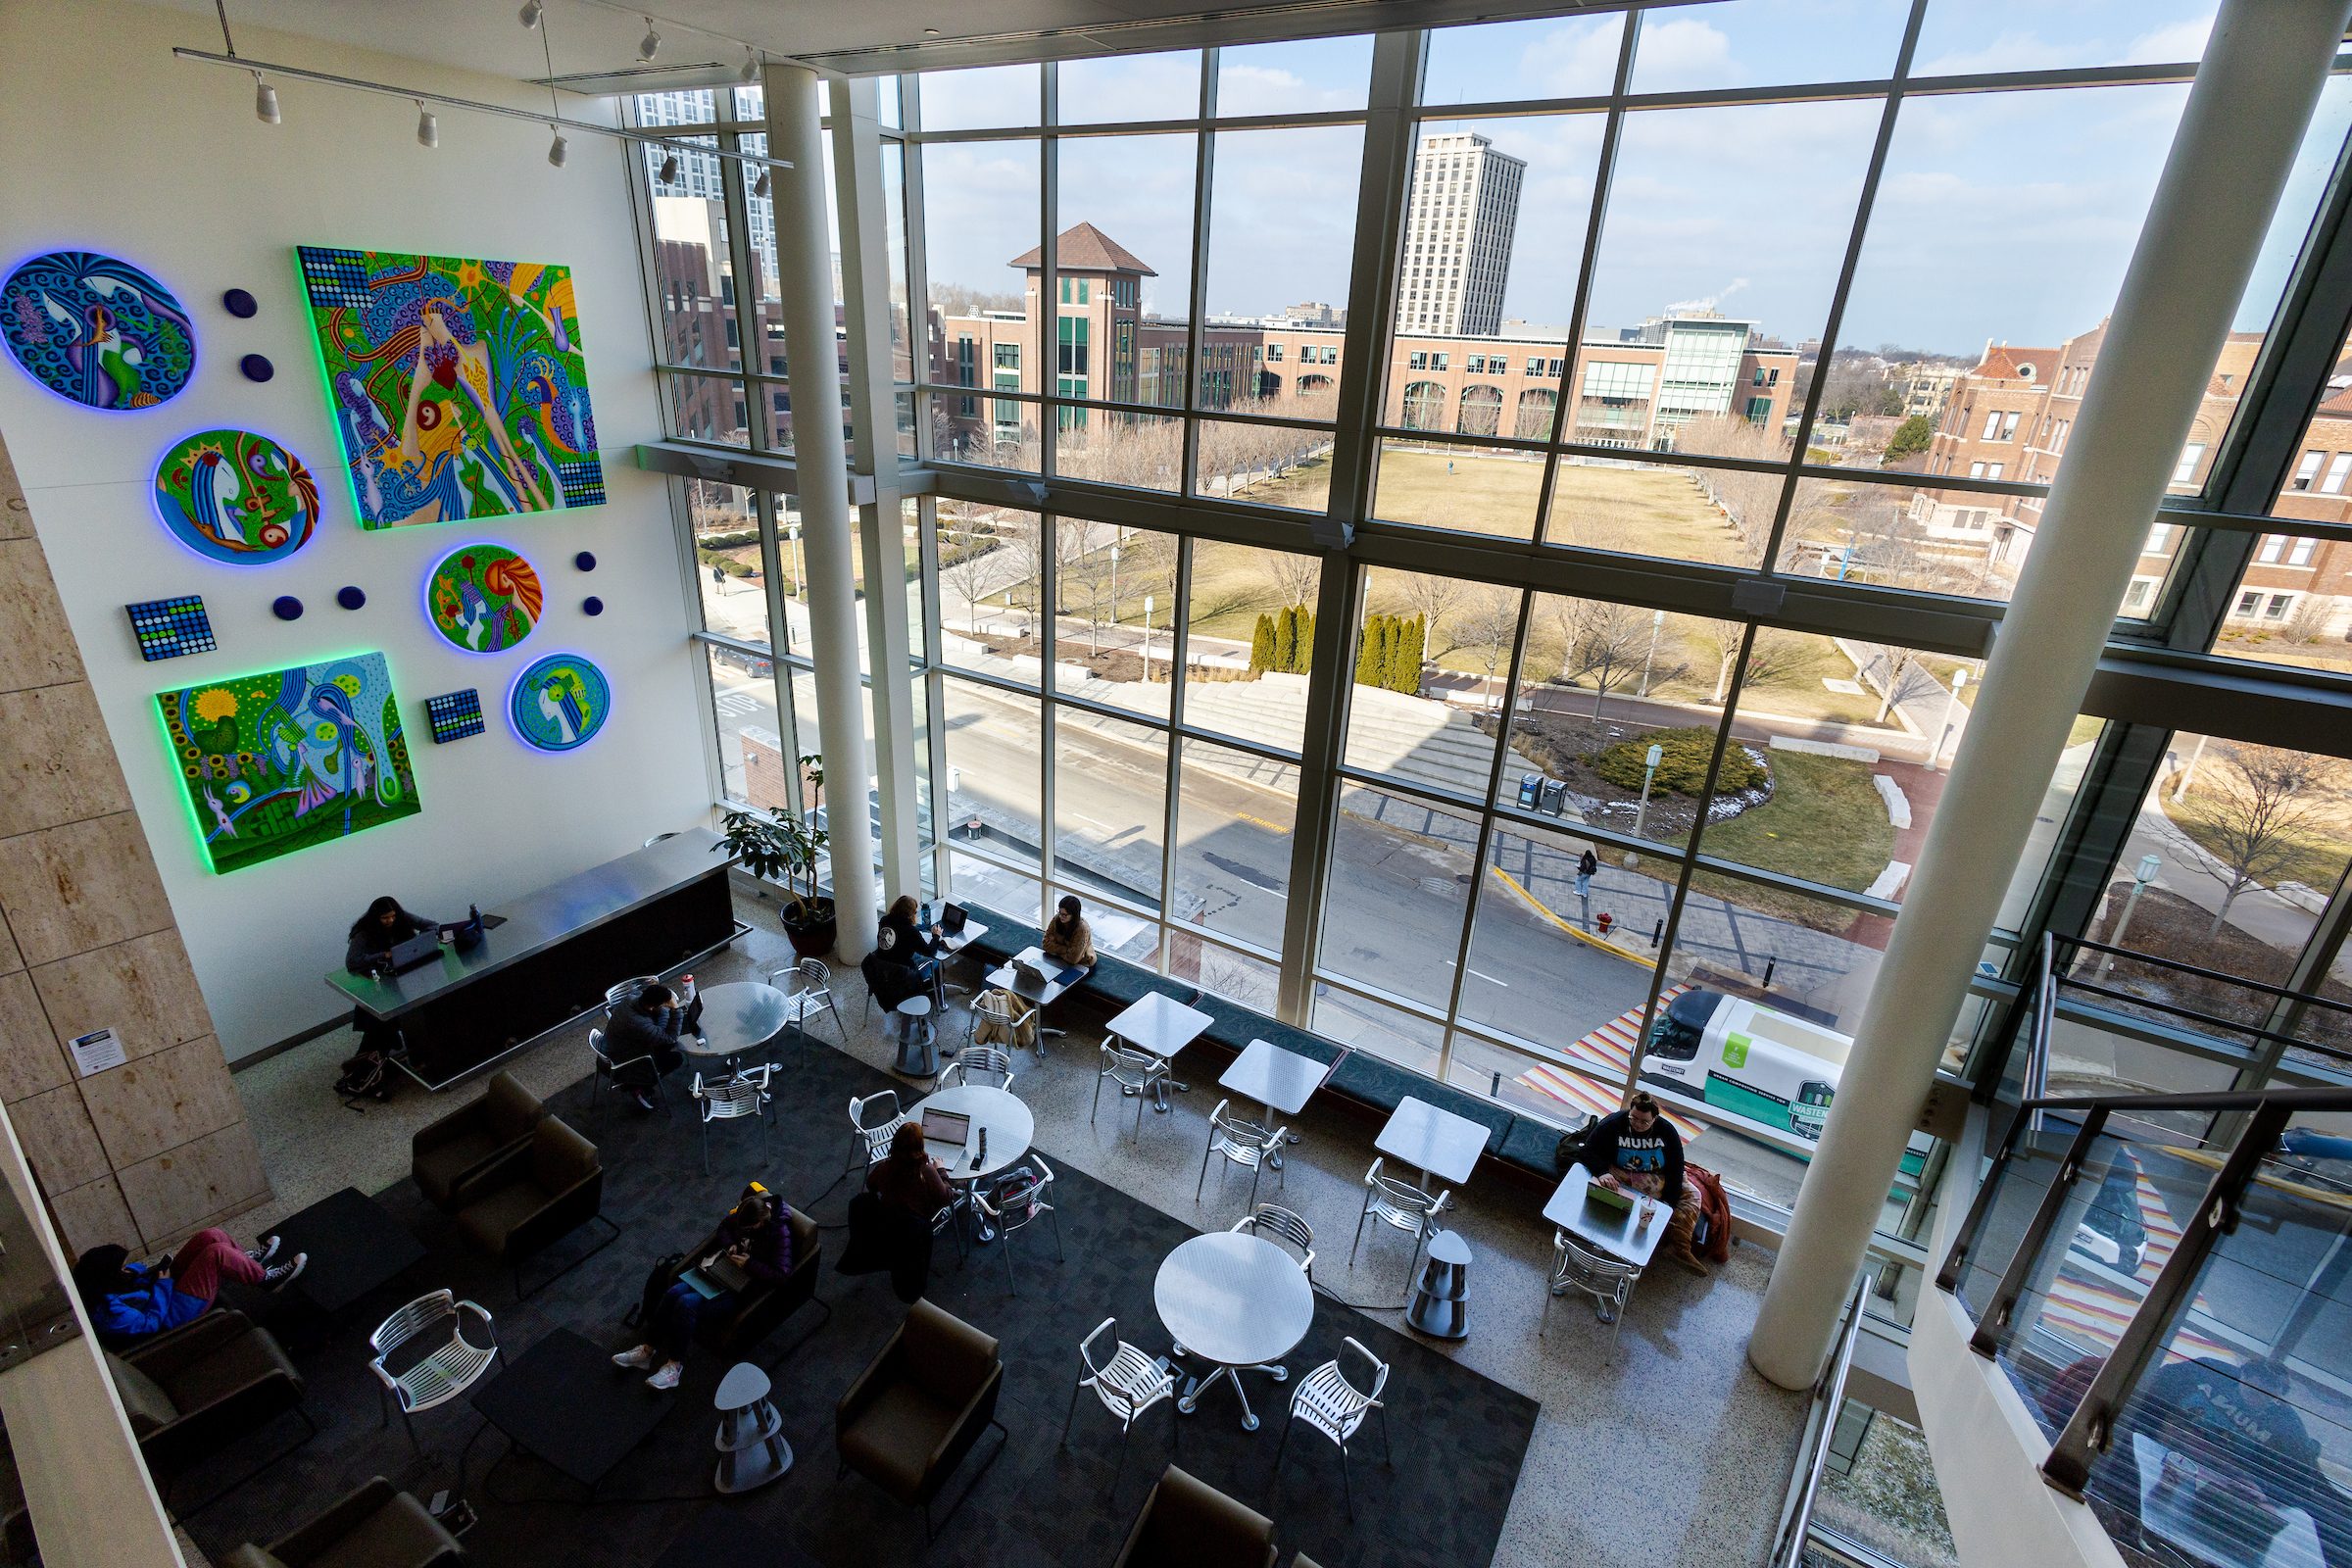 Interior of Quinlan Life Sciences building on January 24, 2023. (Photo by: Lukas Keapproth)